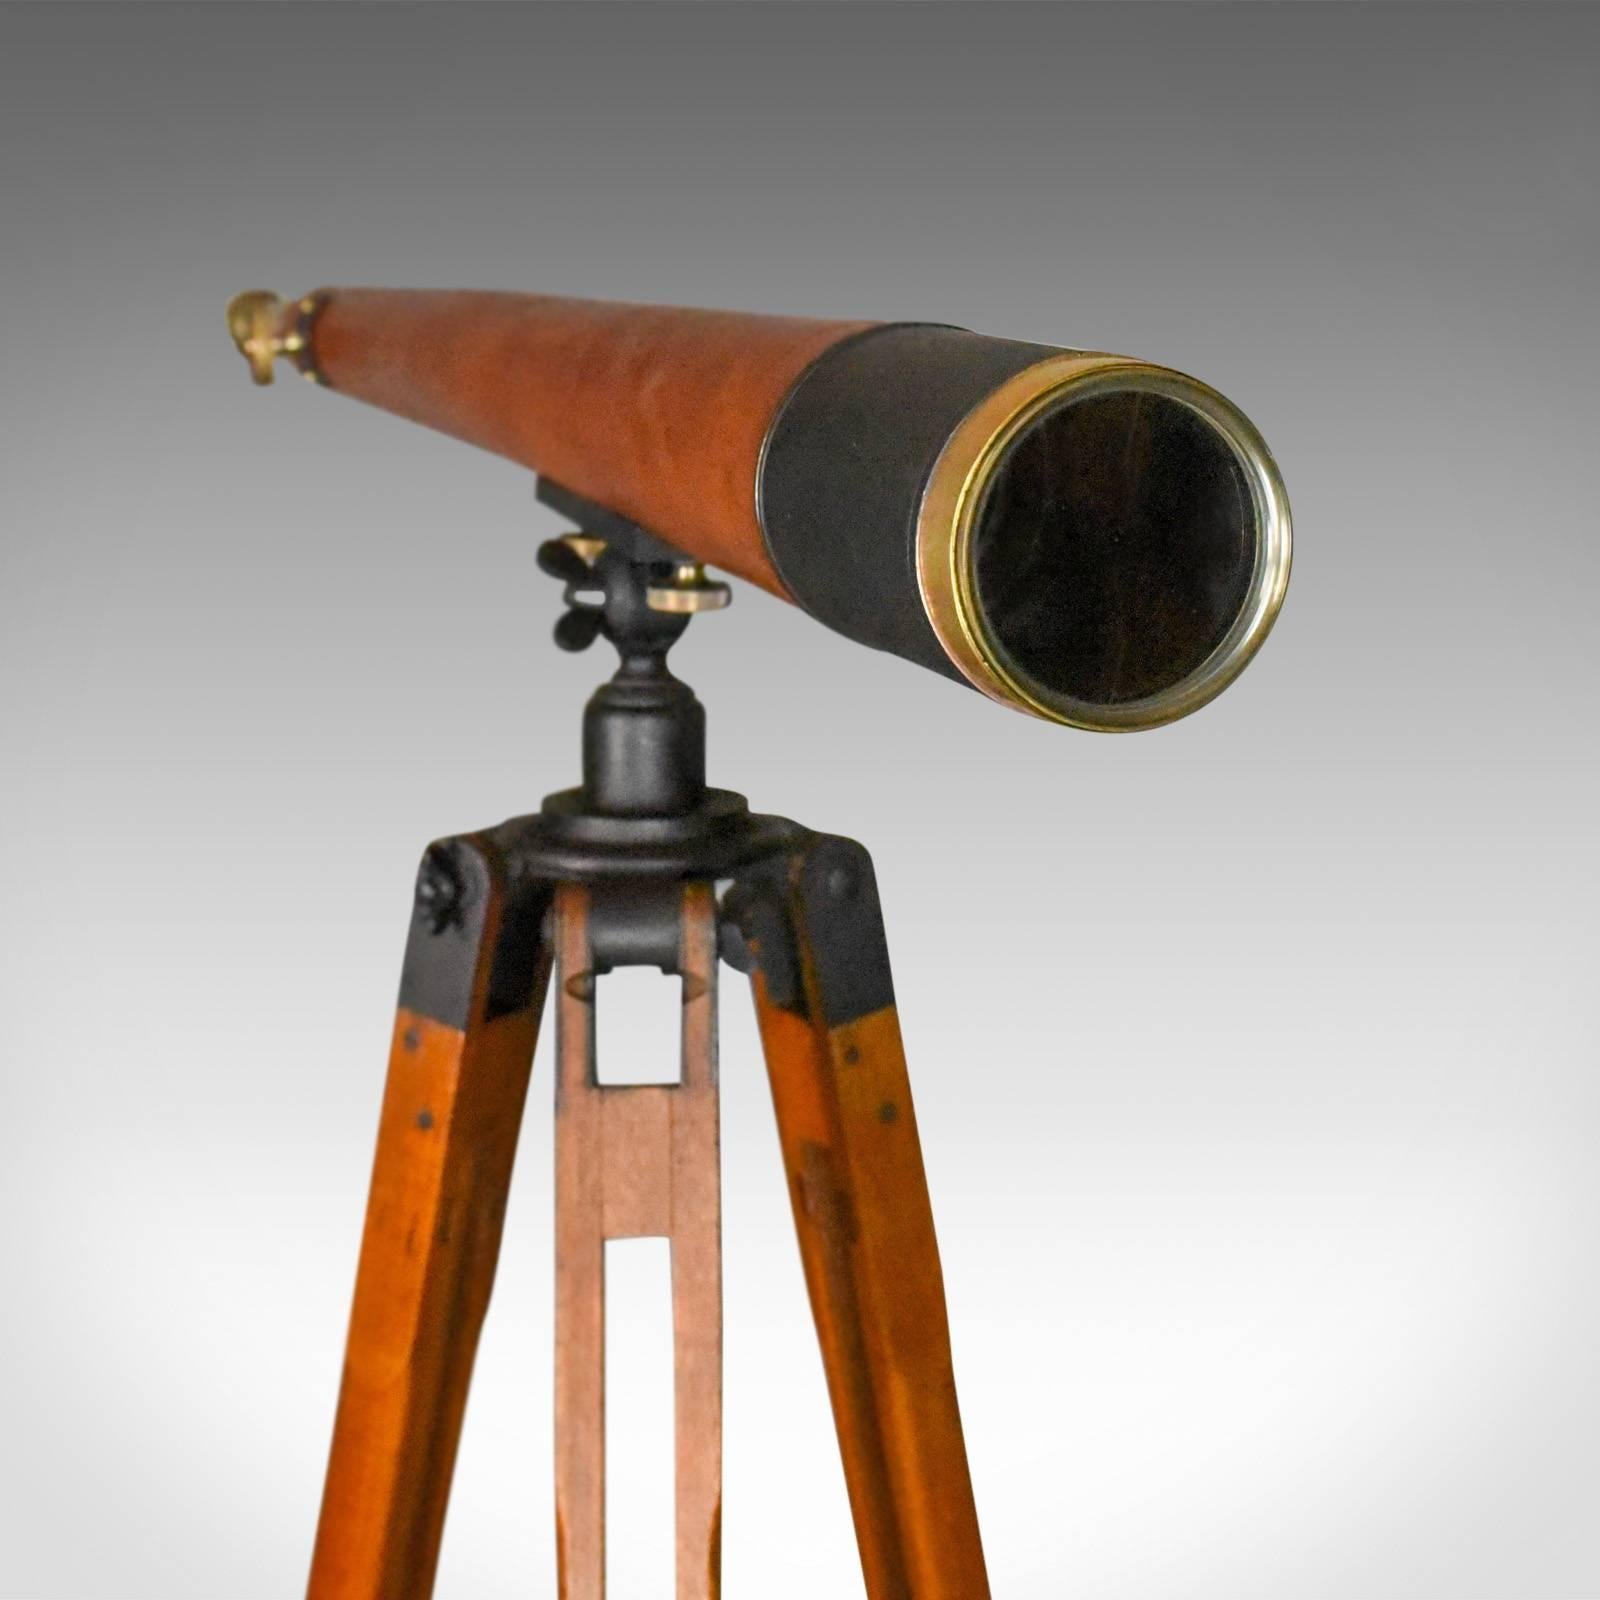 This is an antique telescope on tripod, a three inch tapered refractor for terrestrial or astronomical use, probably originally for military use and dating to circa 1900-1915.

Raised on an oak tripod with anti-glare, stealth paint mount, this